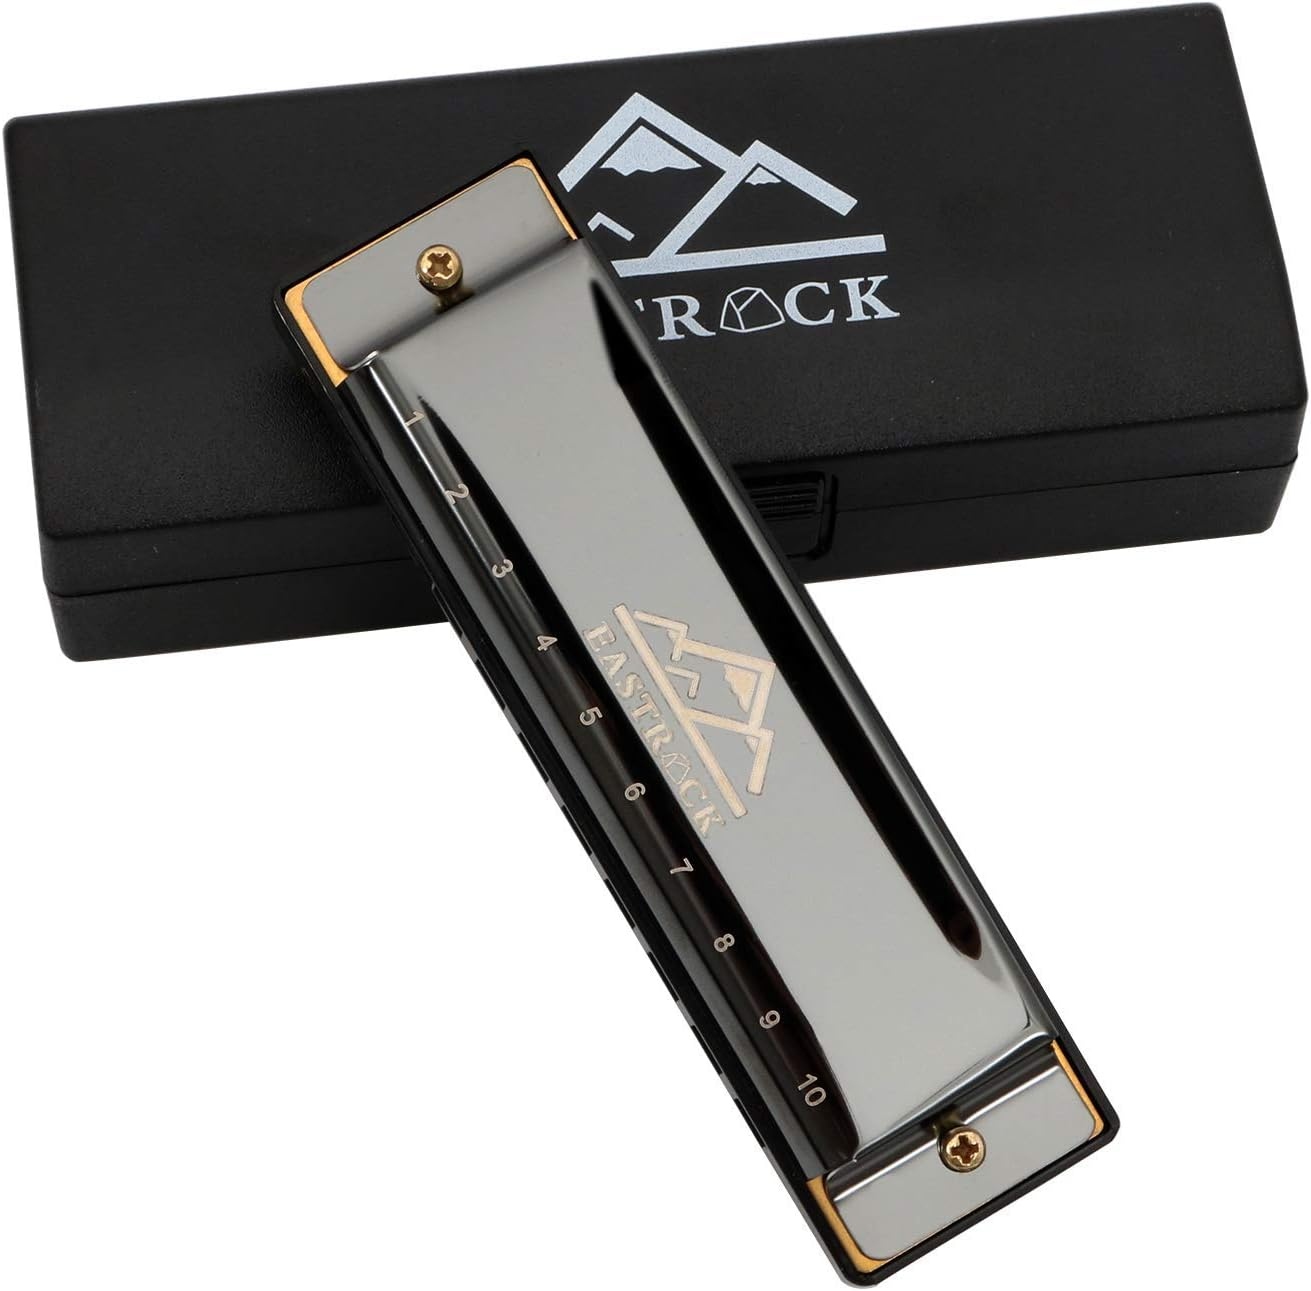 EastRock Blues Harmonica Mouth Organ 10 Hole C Key with Case, Diatonic Harmonica for Professional Player, Beginner, Students gifts, Adult, Friends, Gift Black